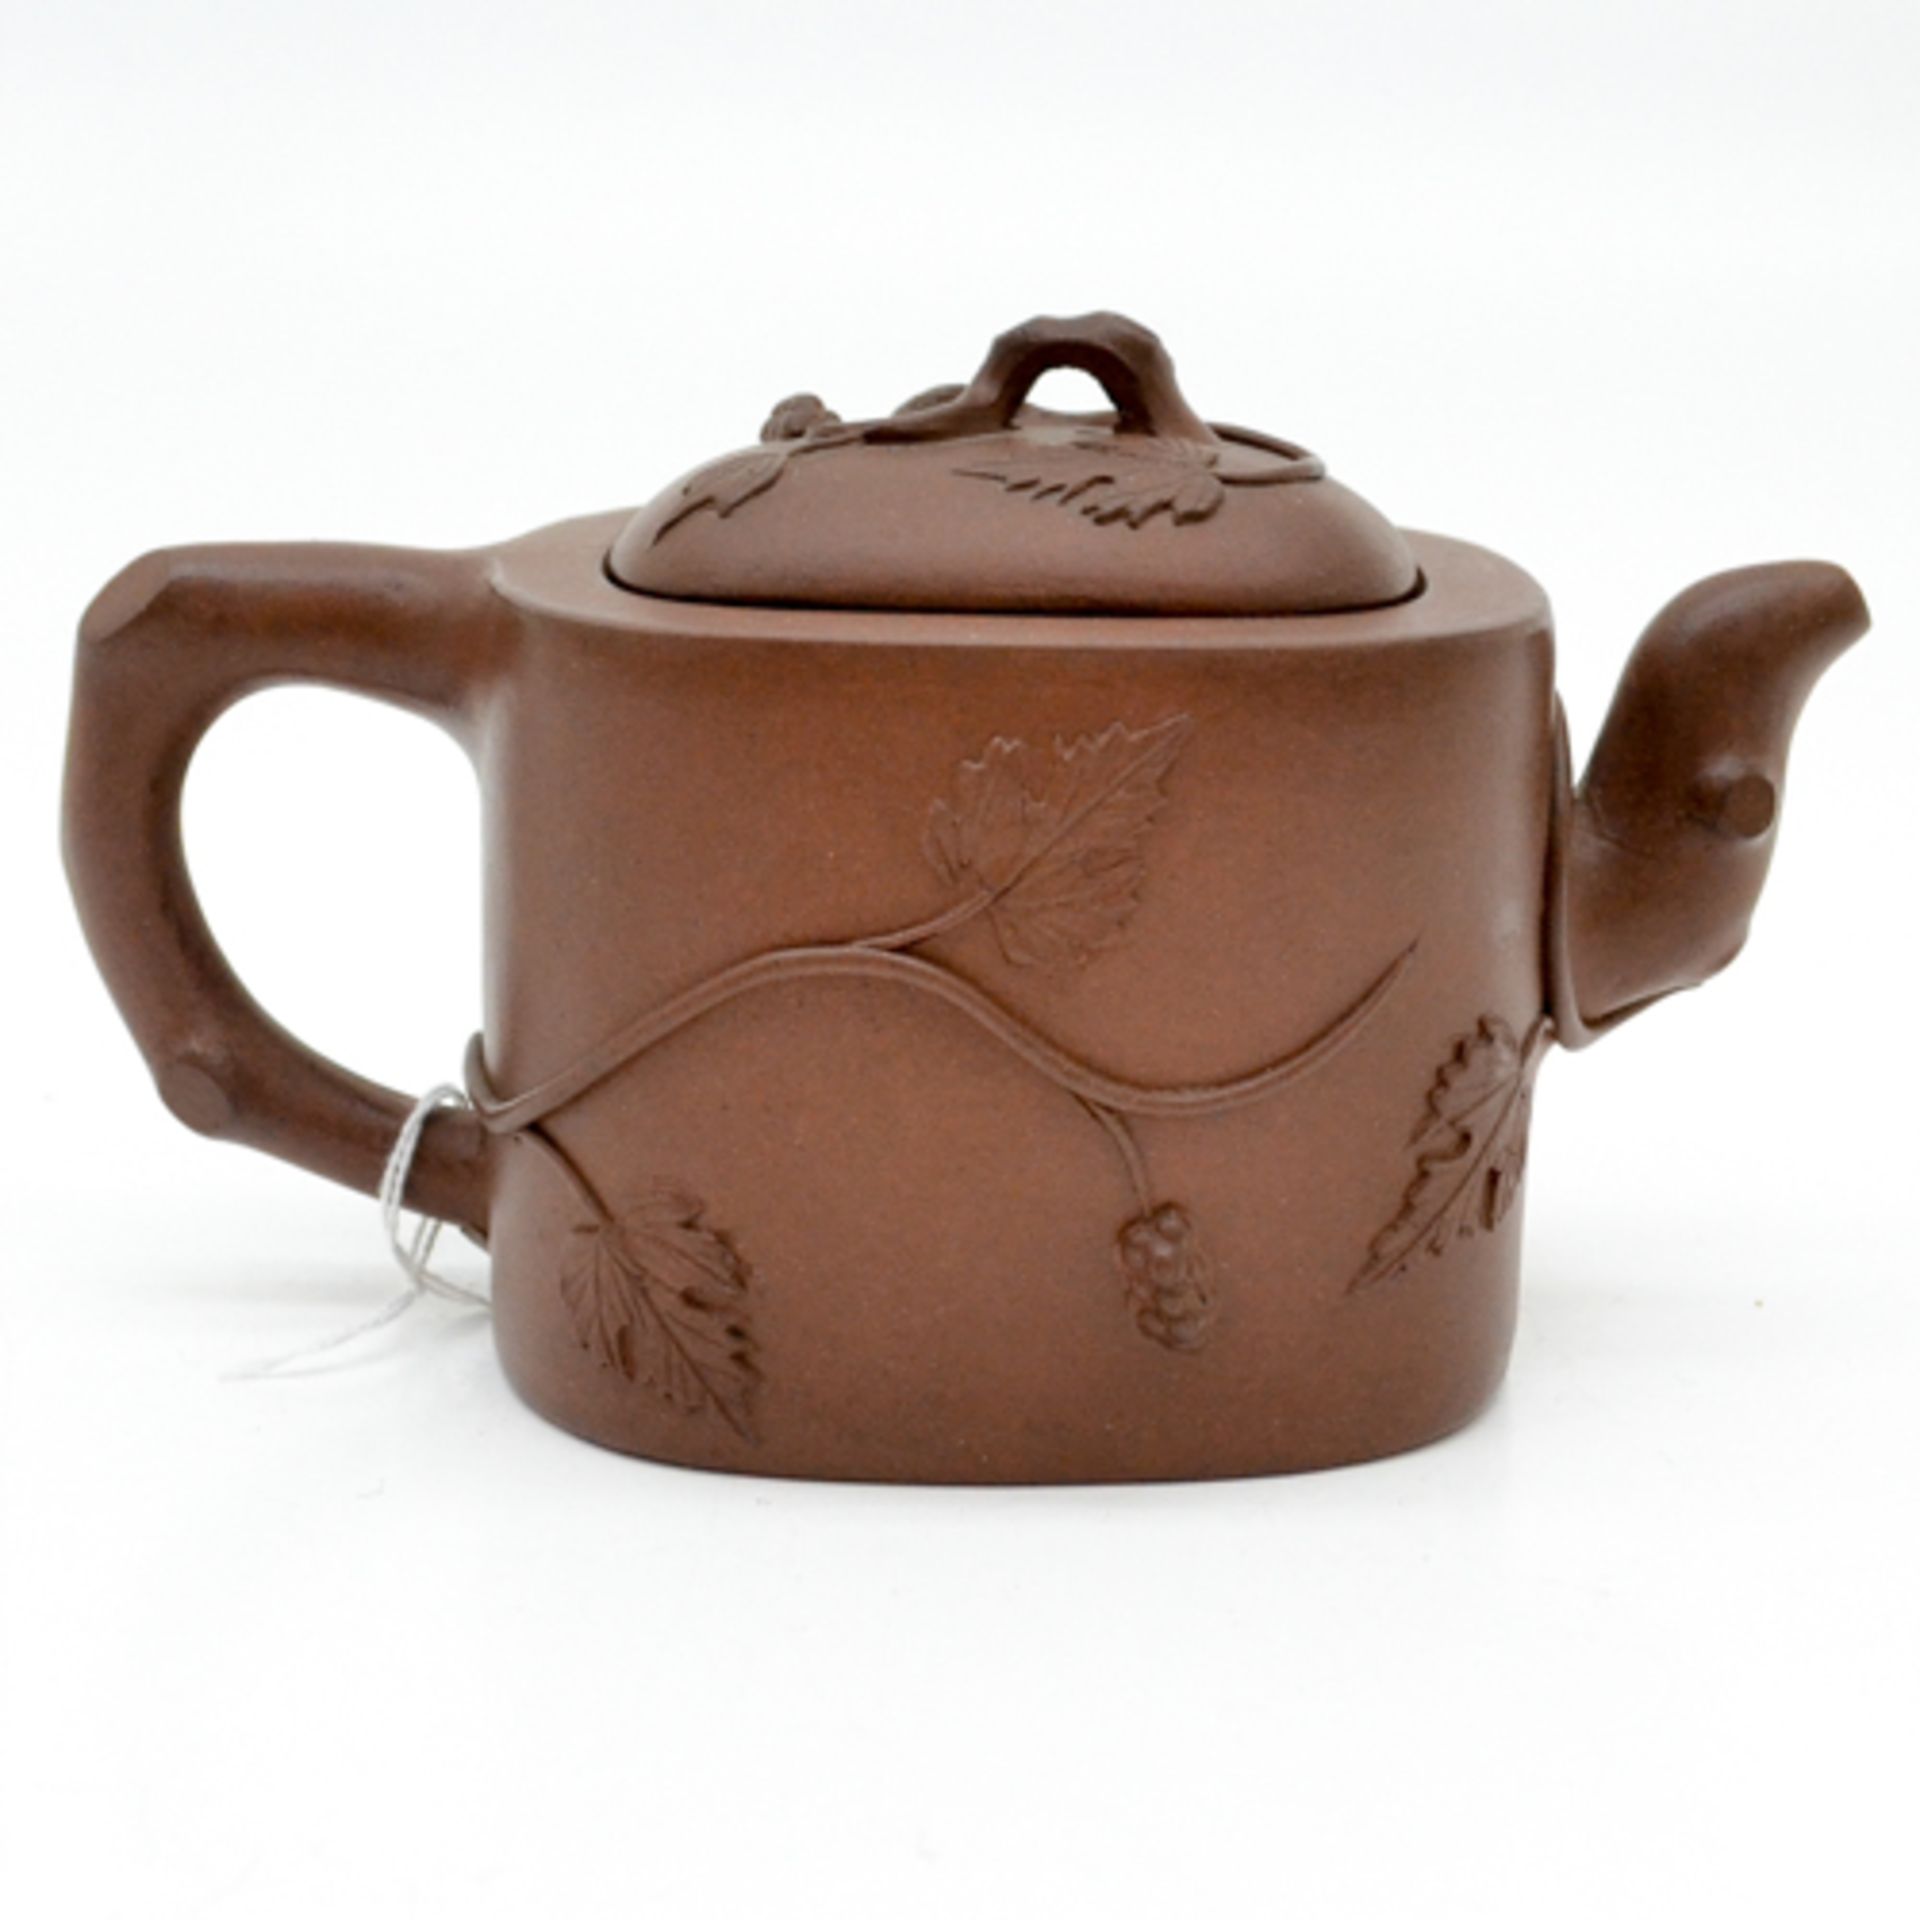 YIXING TEAPOT Decor of grapes and squirrels, Marked in lid and bottom, 11 cm tall. - Bild 3 aus 6